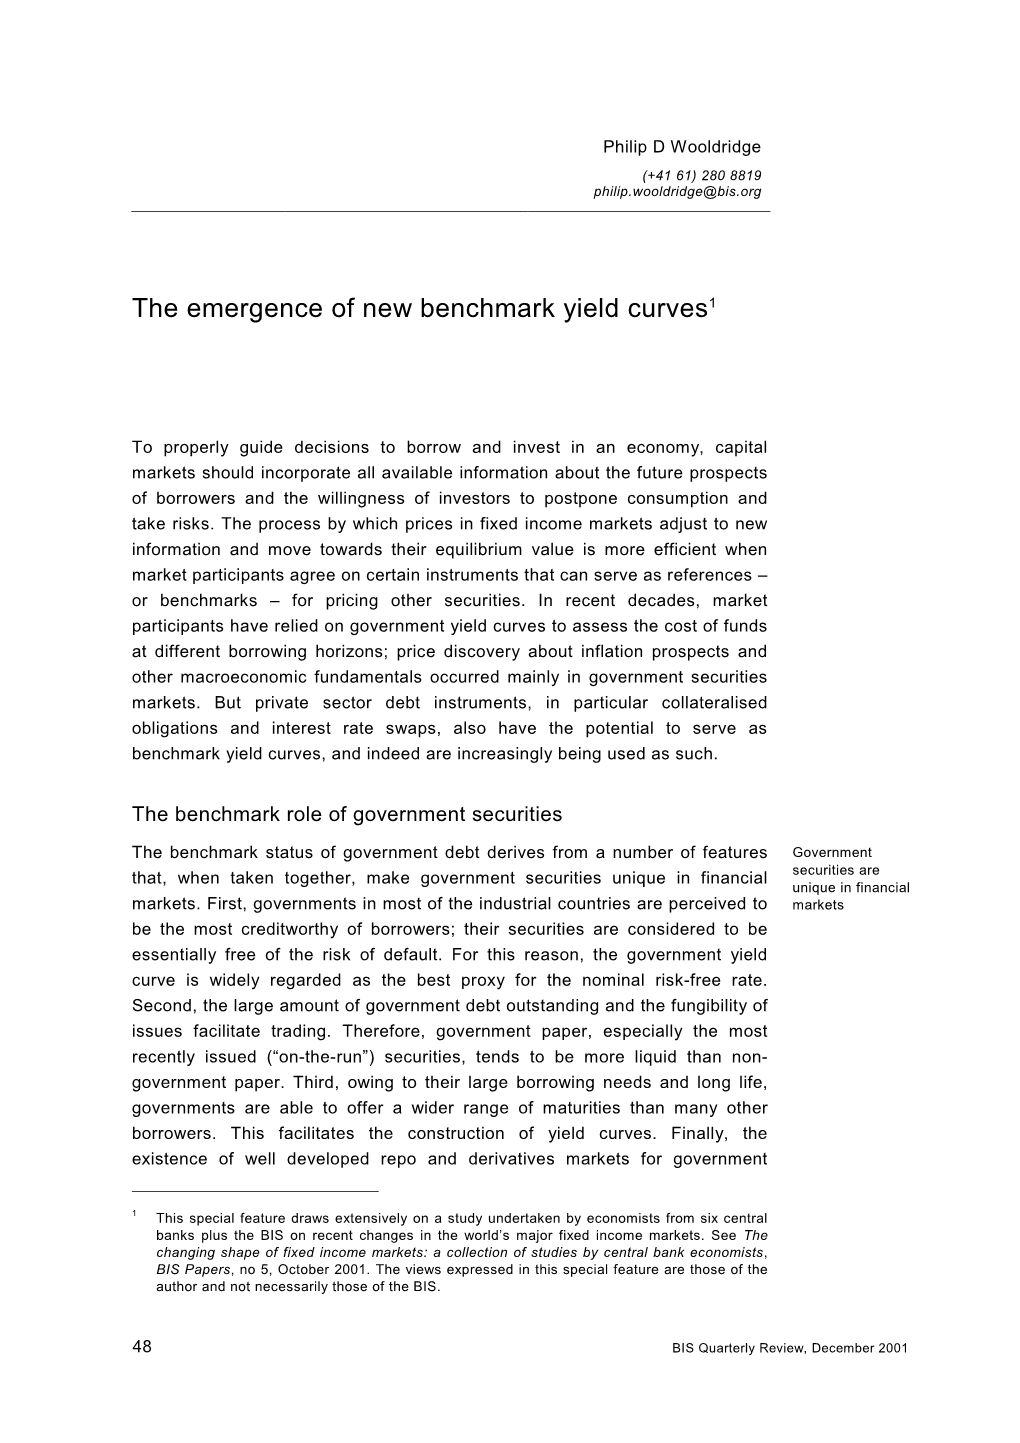 The Emergence of New Benchmark Yield Curves1